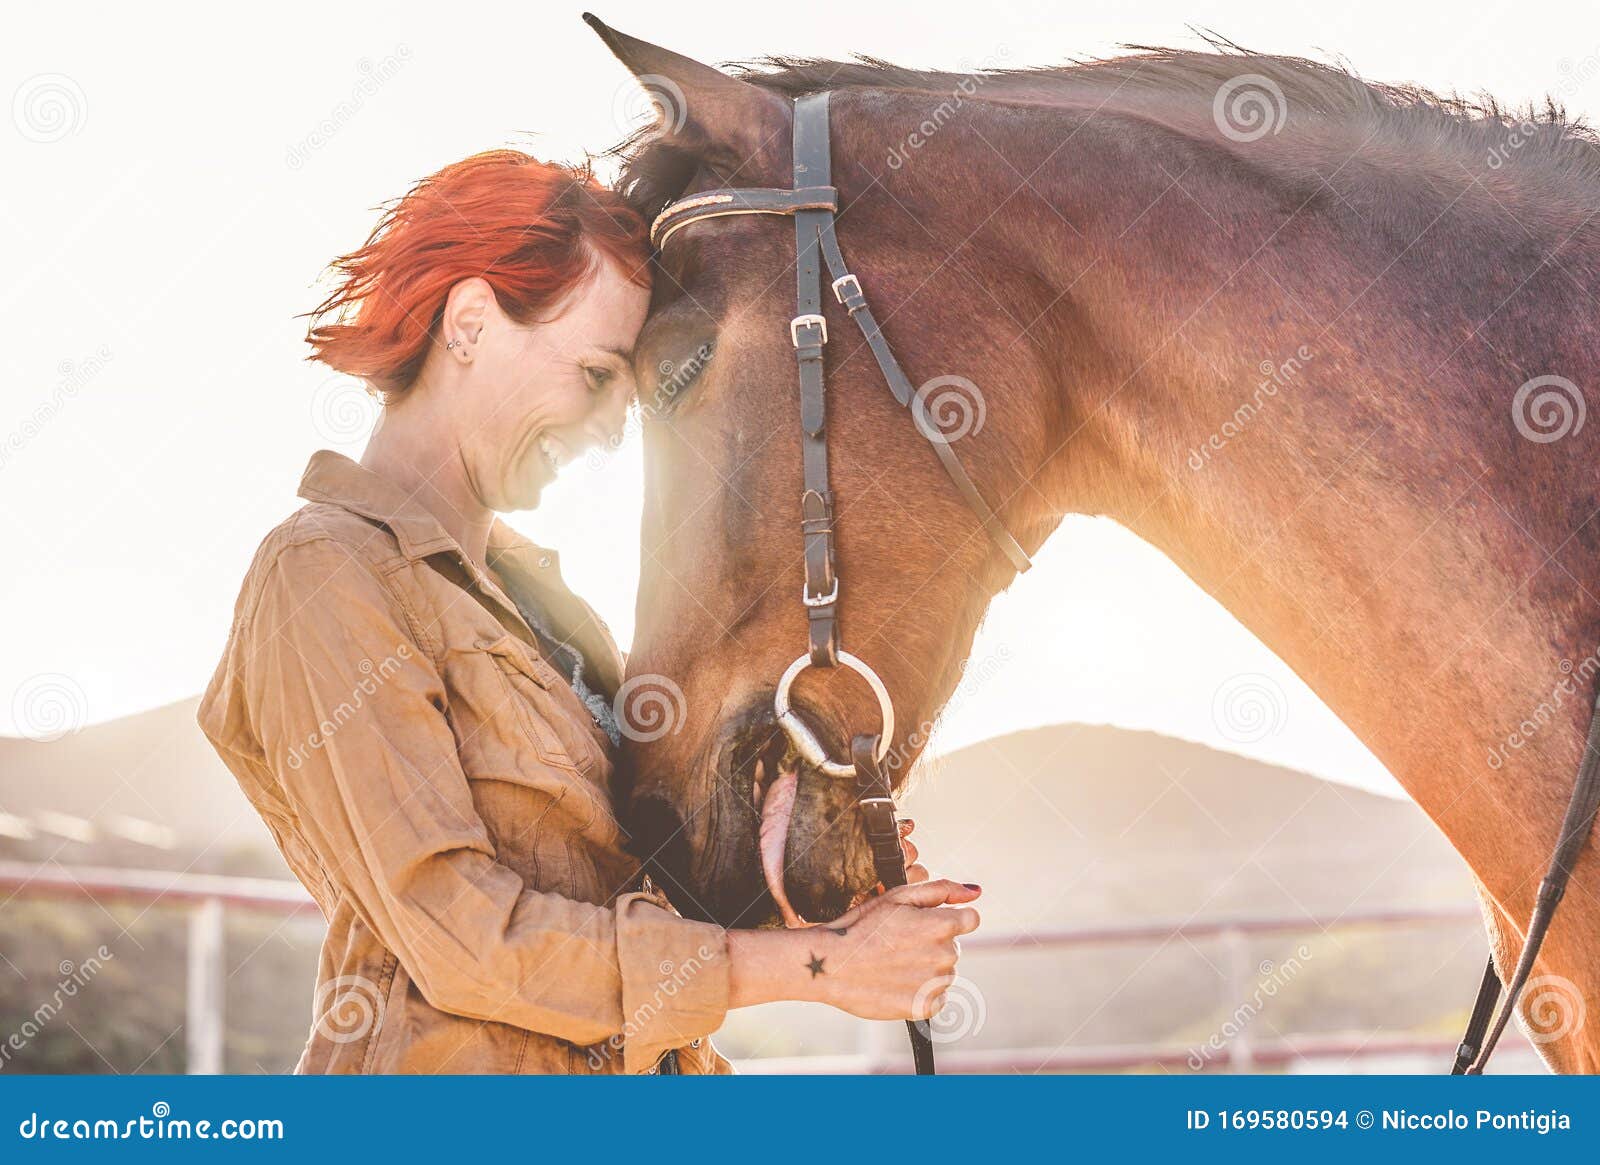 young farmer woman hugging her horse - cowgirl having fun inside equestrian corral ranch - concept about love between people and